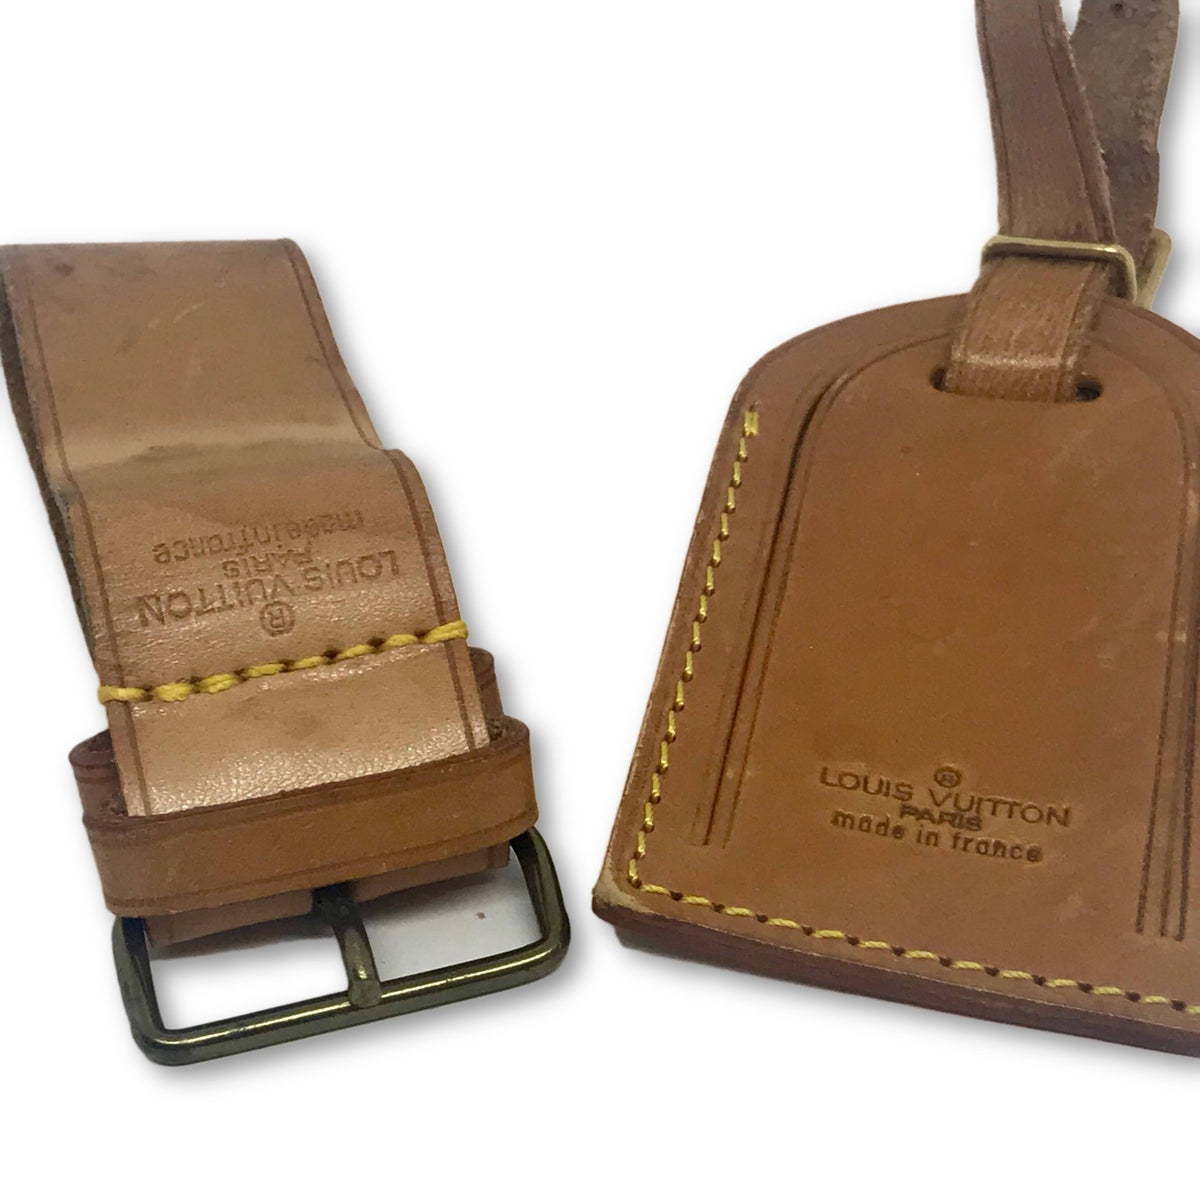 Louis Vuitton, Bags, Authentic Louis Vuitton Luggage Bag Tag And Strap